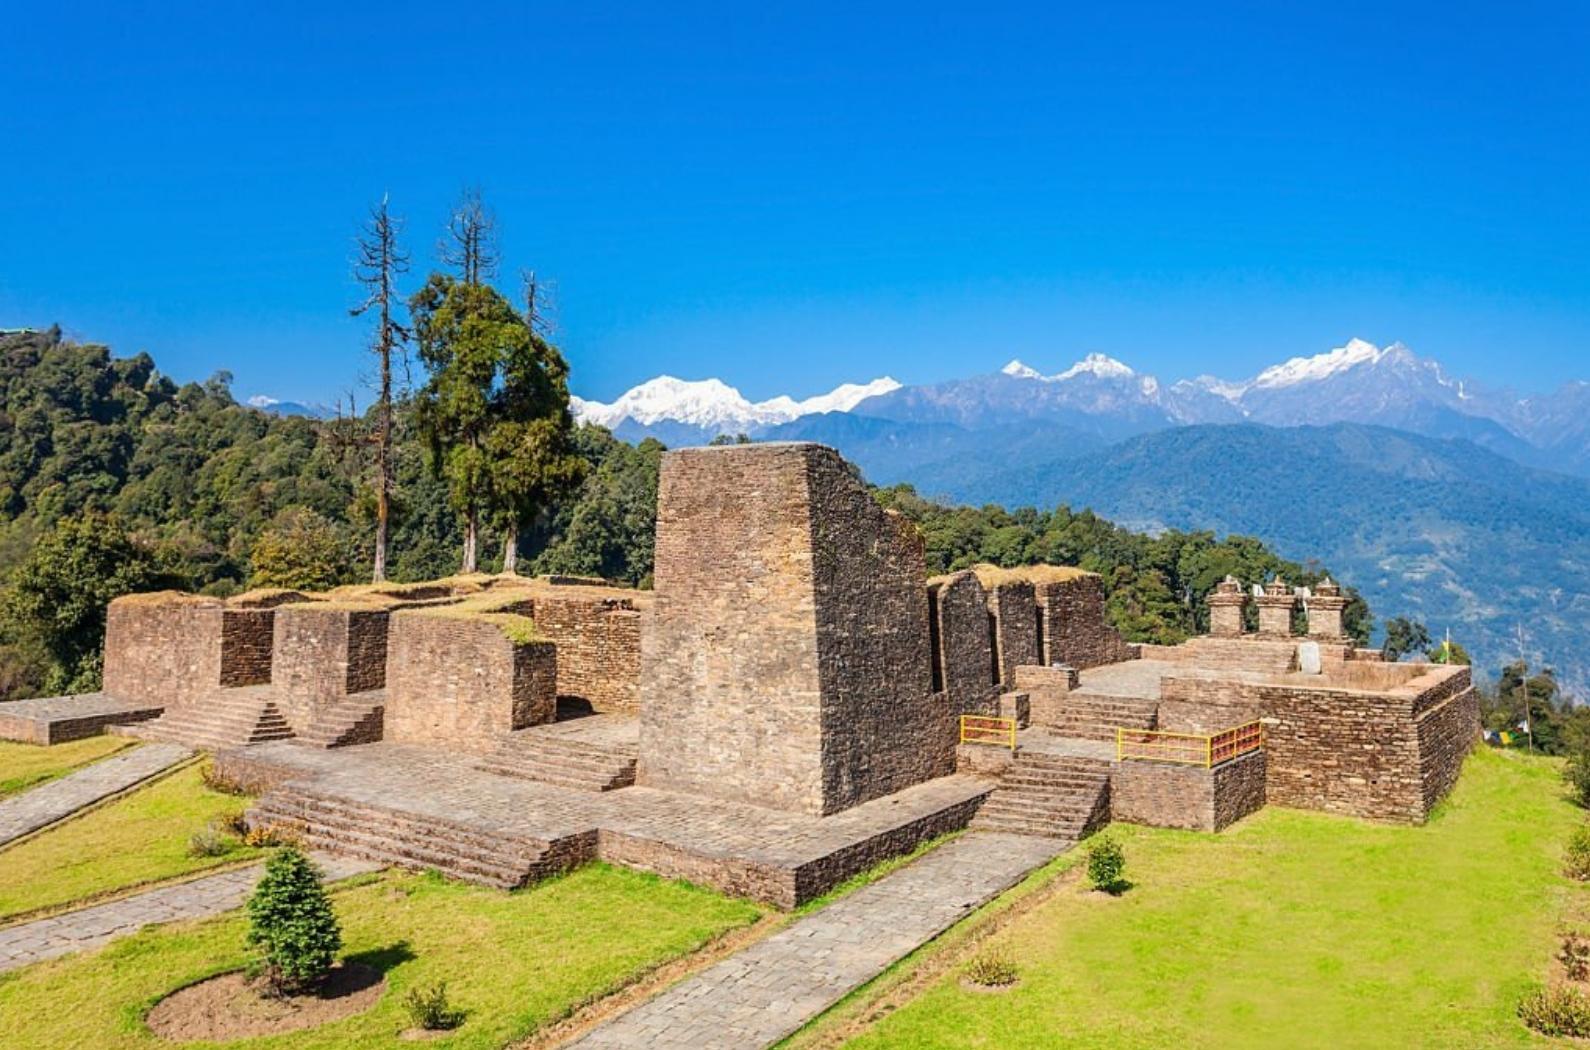 Rabdentse Ruins near Pelling.Rabdentse was the second capital of the former kingdom of Sikkim.